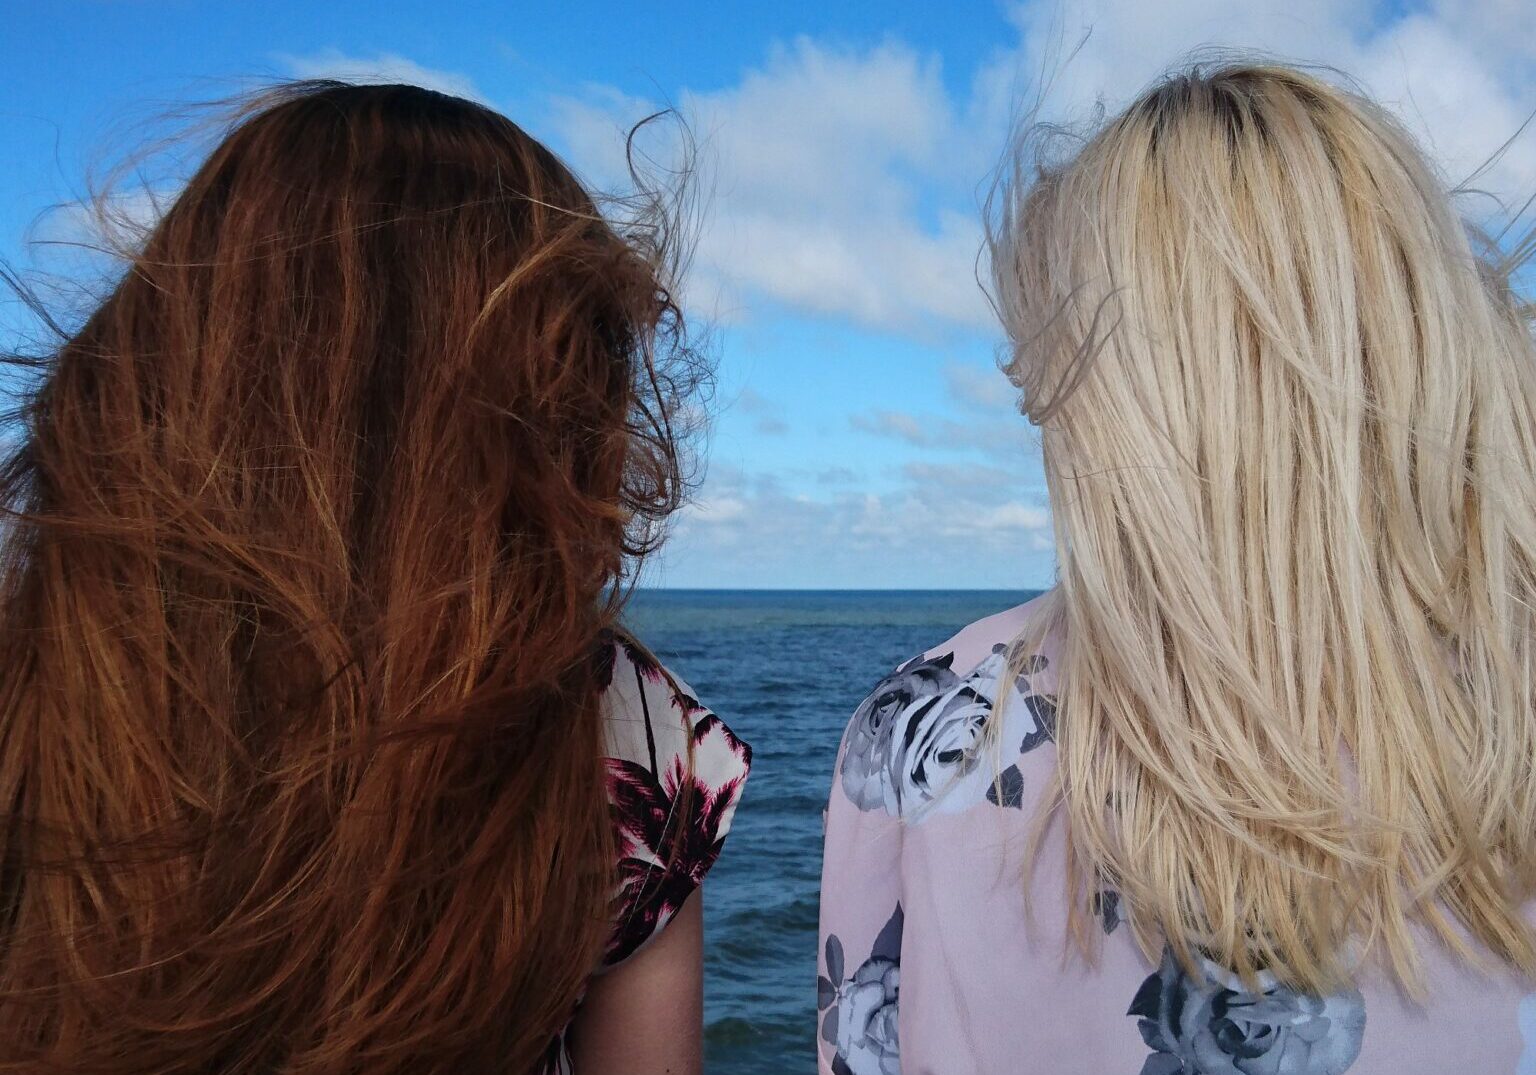 The back of two women's heads